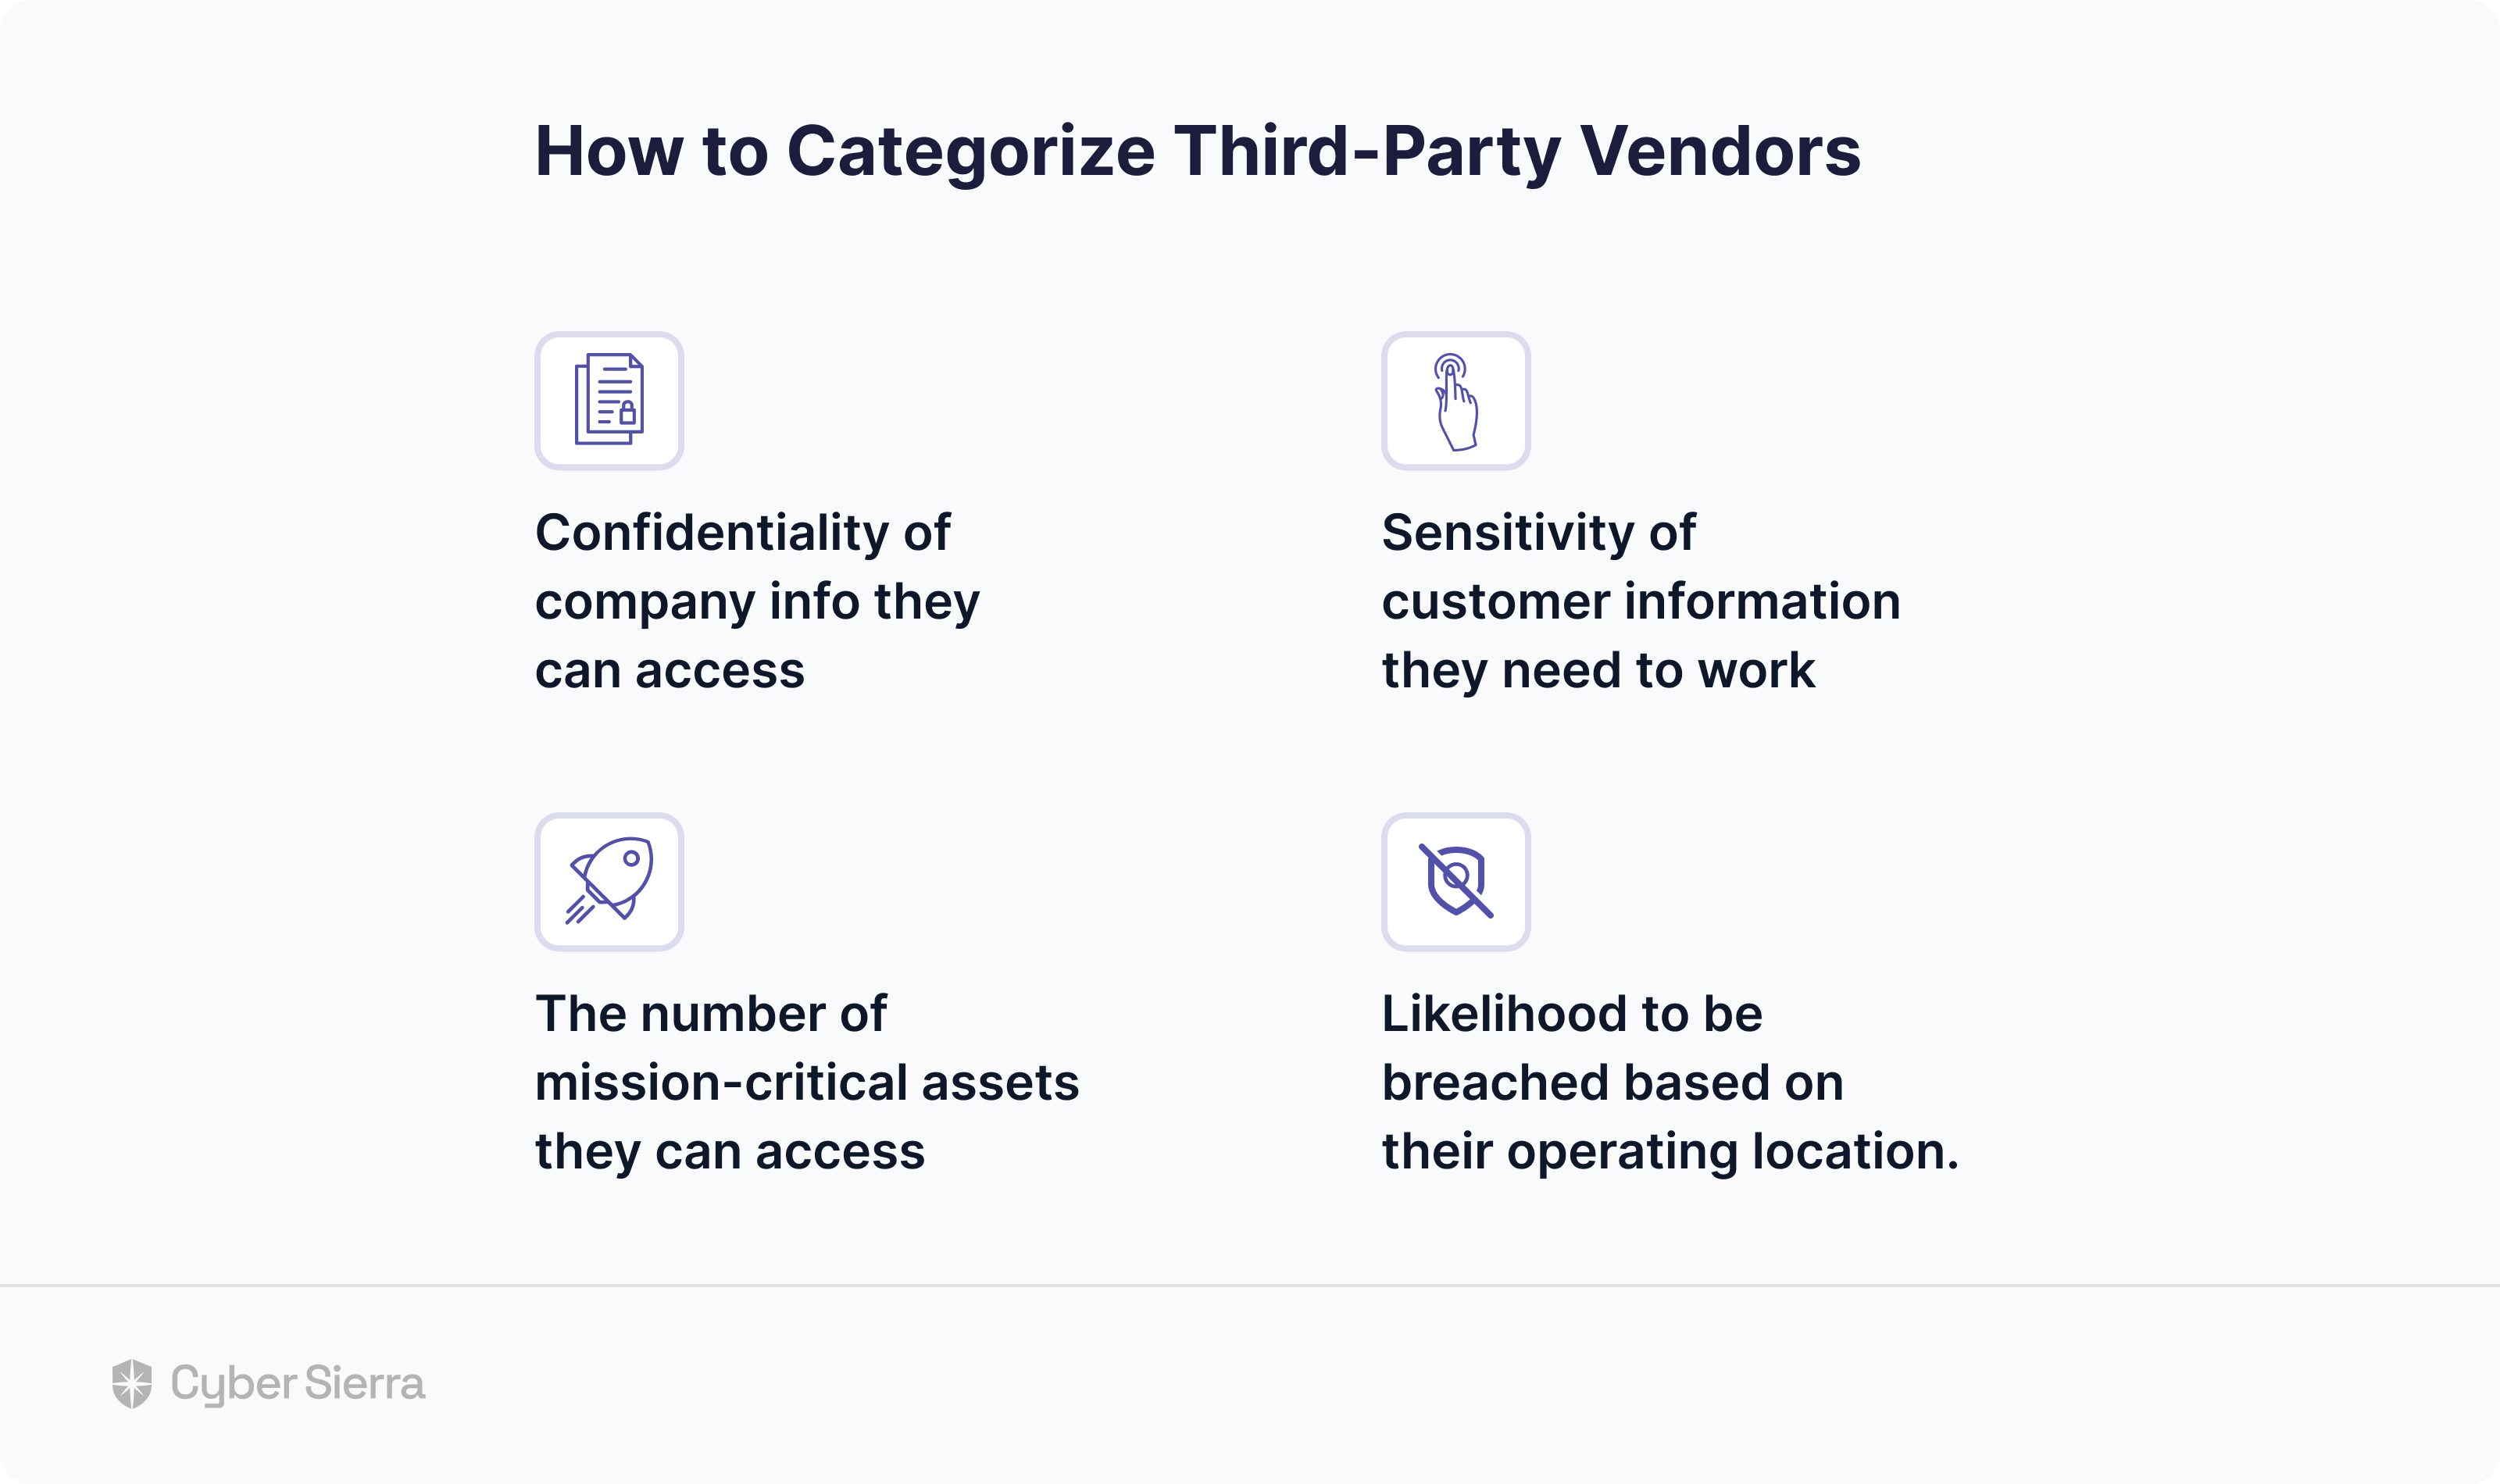 Uber’s security team categorized third-parties in their vendor ecosystem on criteria